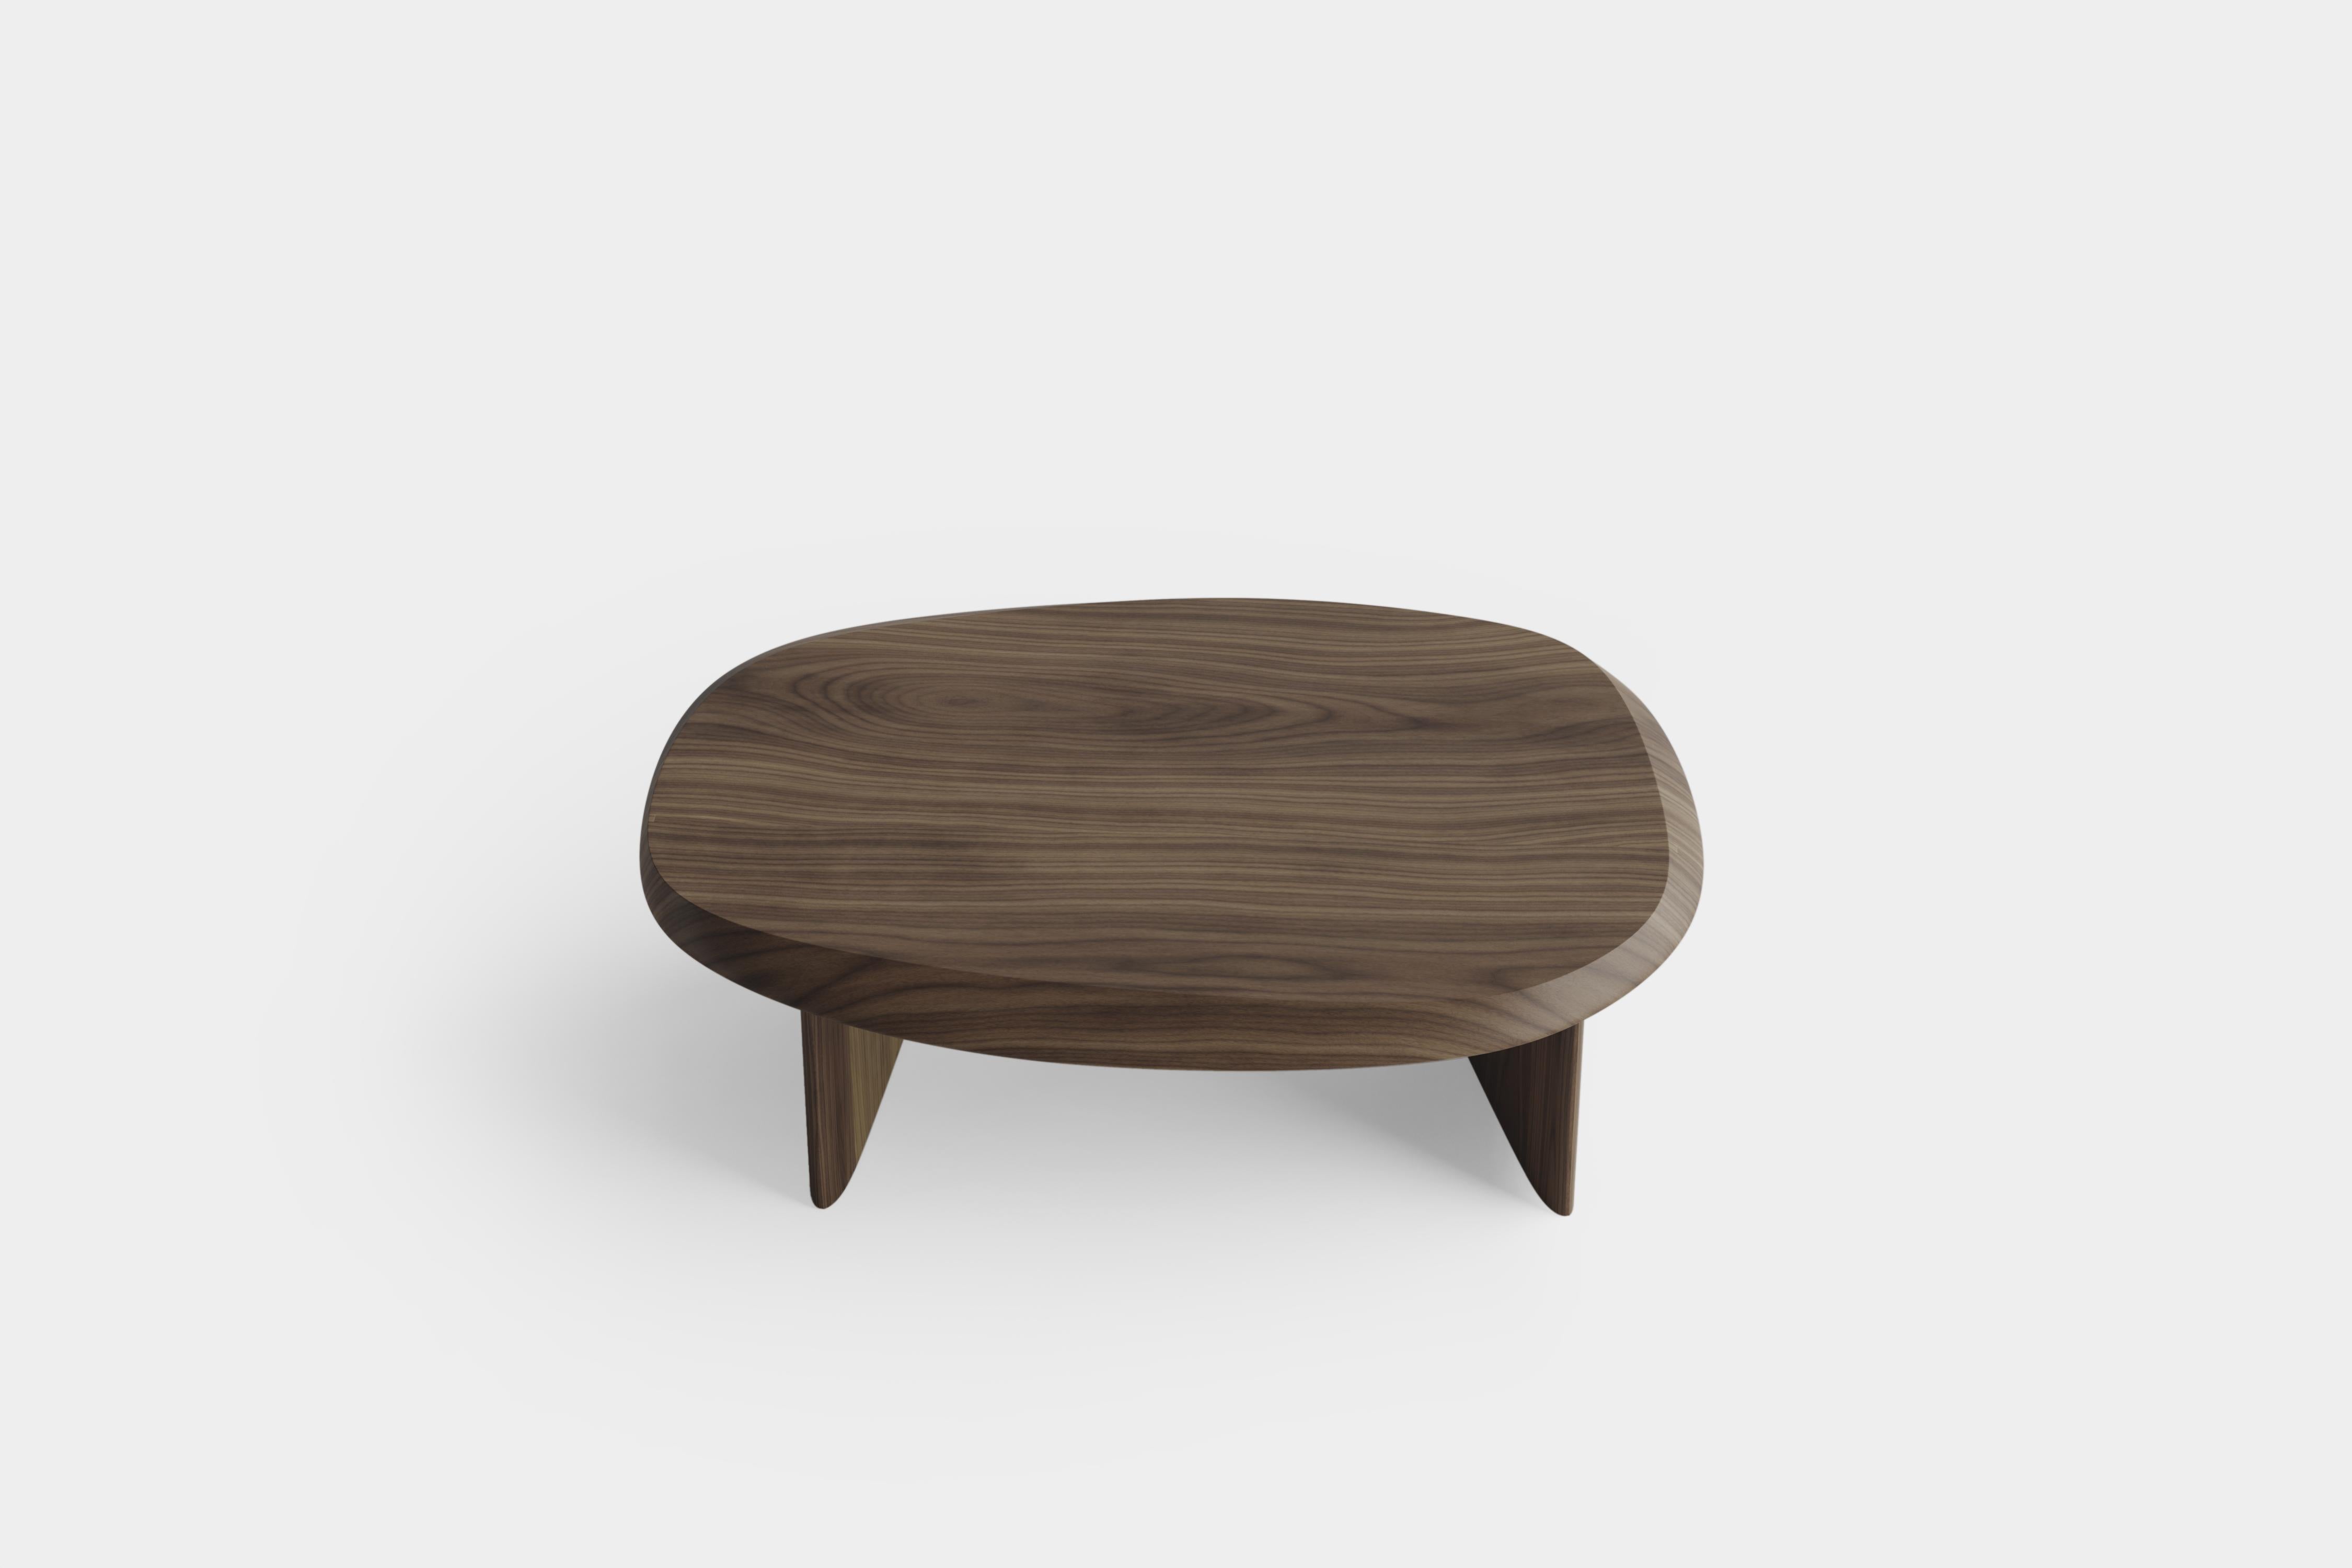 Mexican Duna Coffee Table in Solid Walnut Wood, Coffee Table by Joel Escalona For Sale